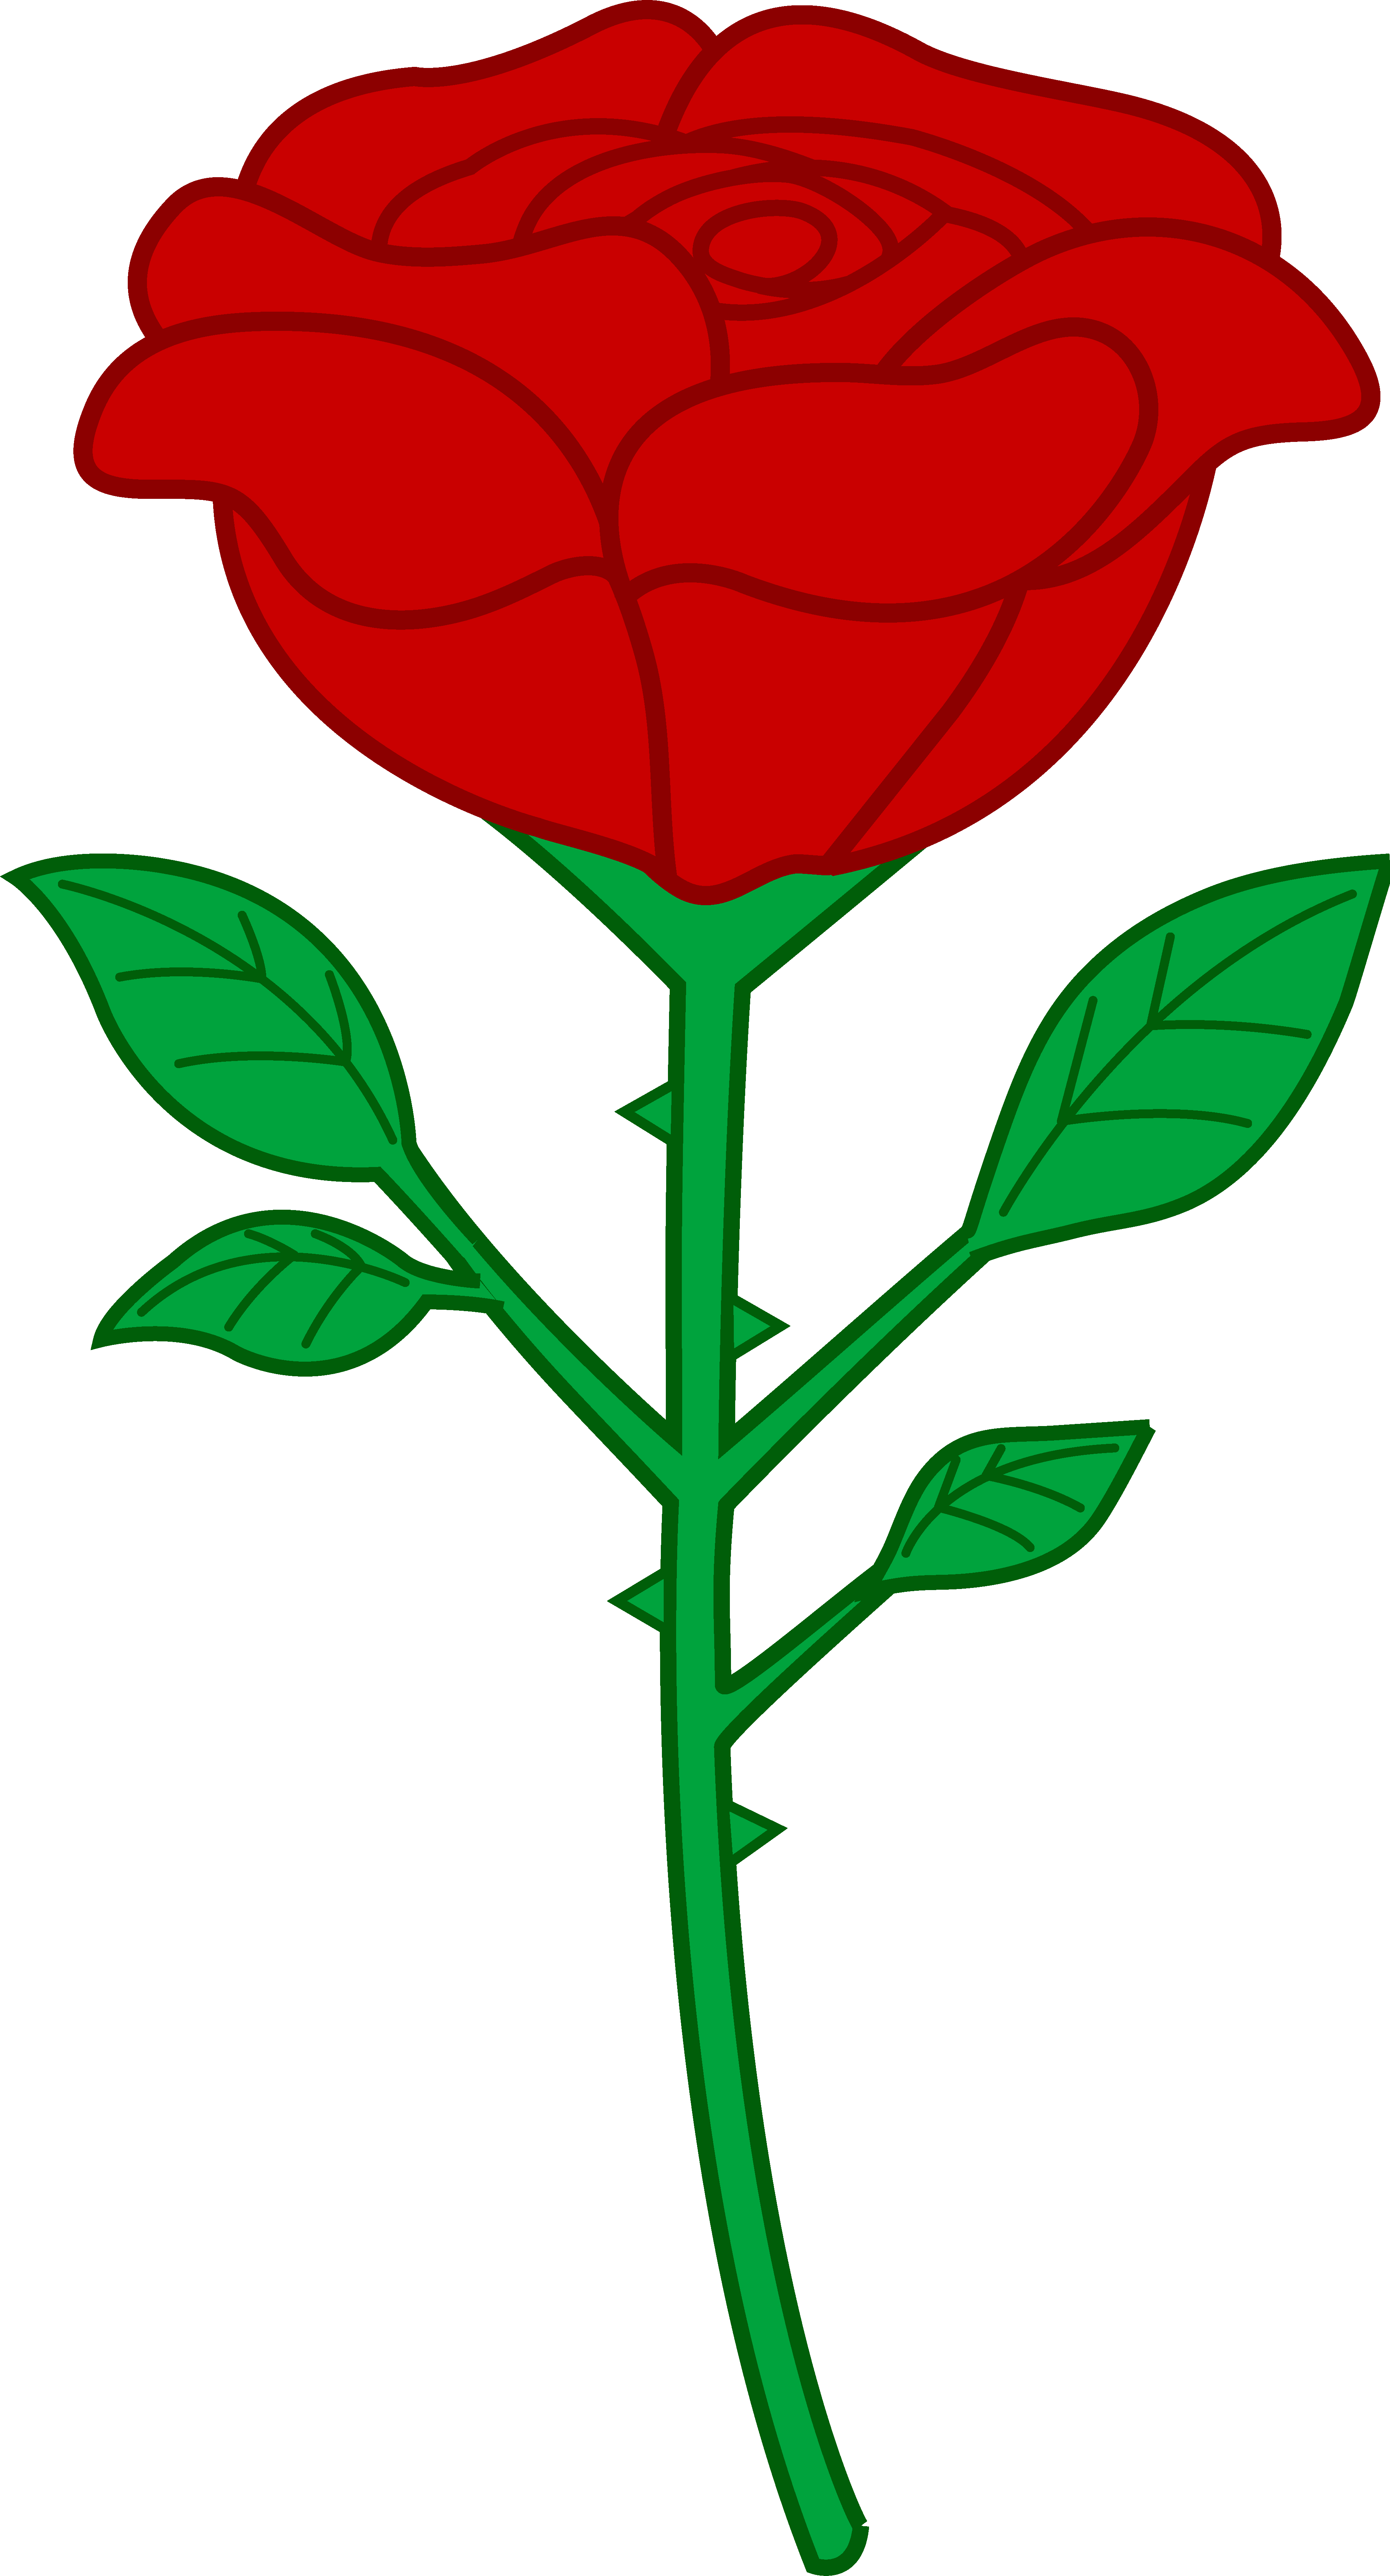 Rose clip art free clipart images 4